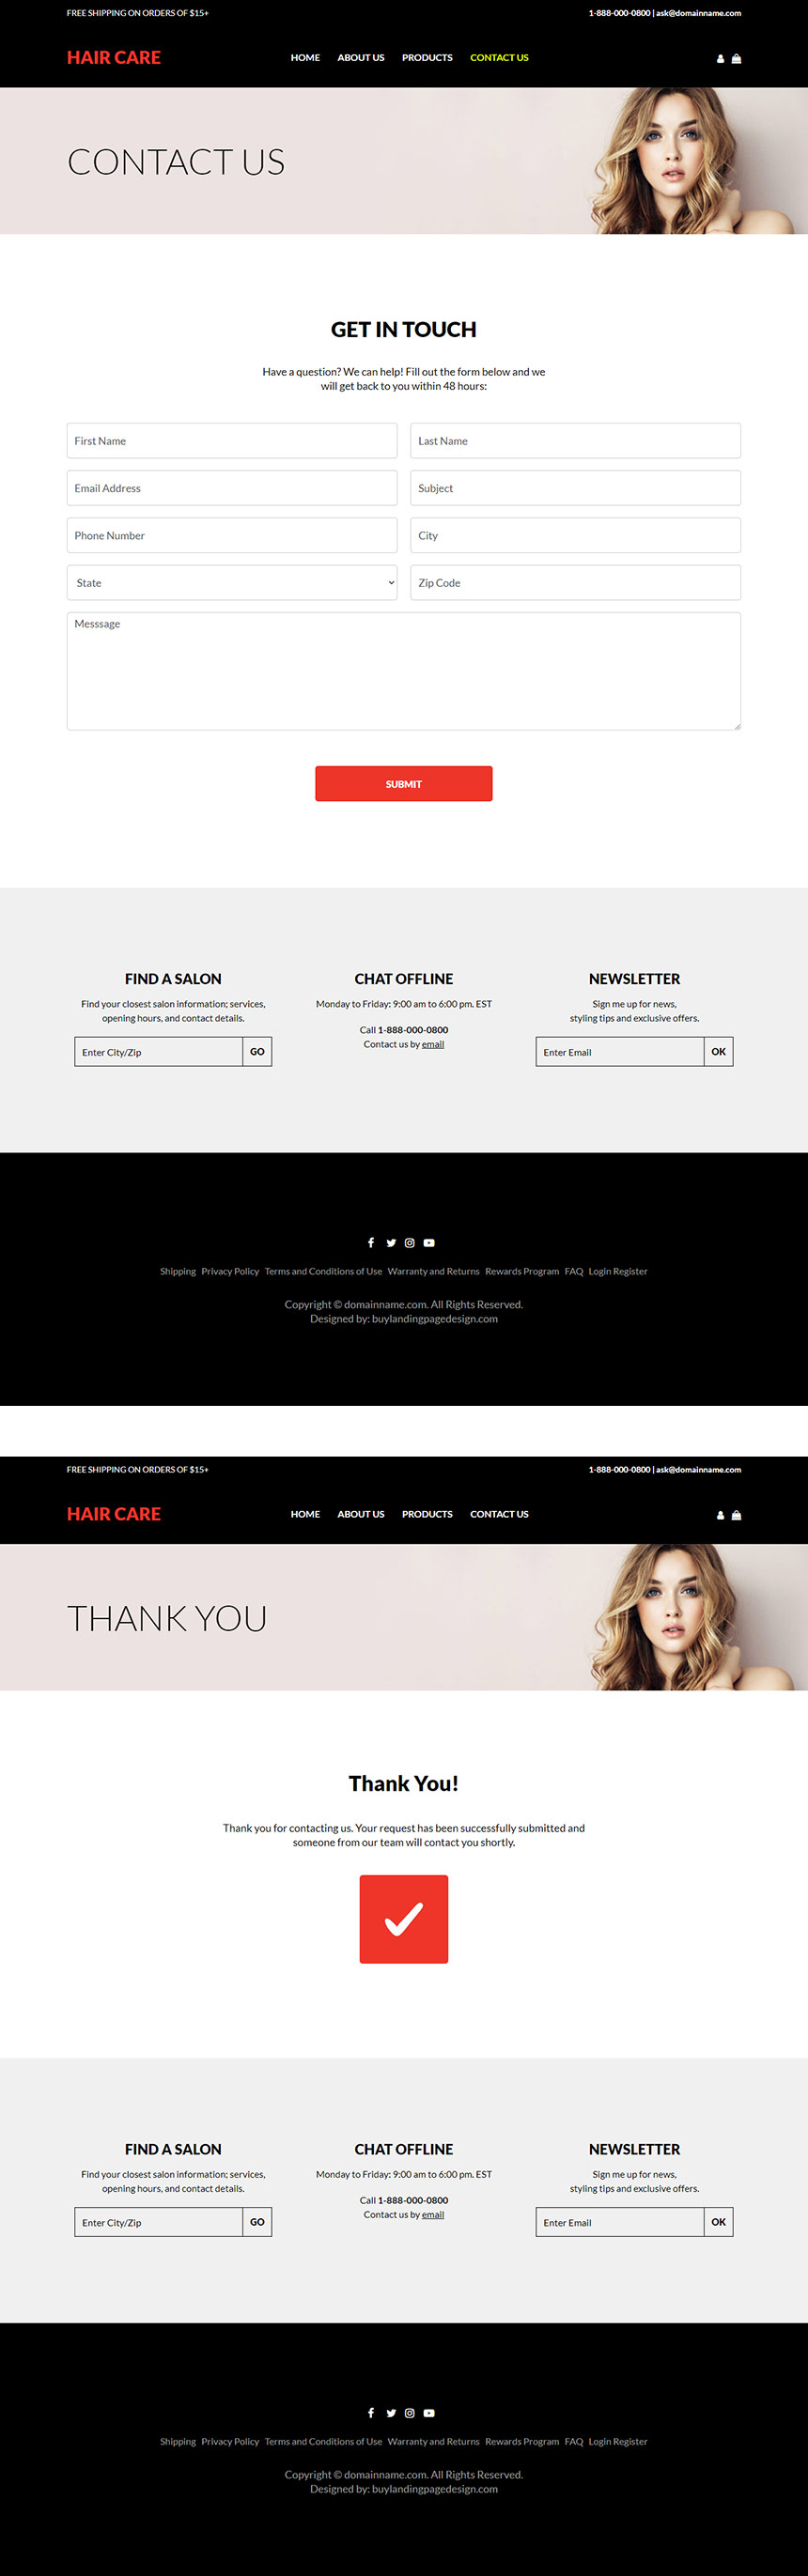 hair care and styling responsive website design